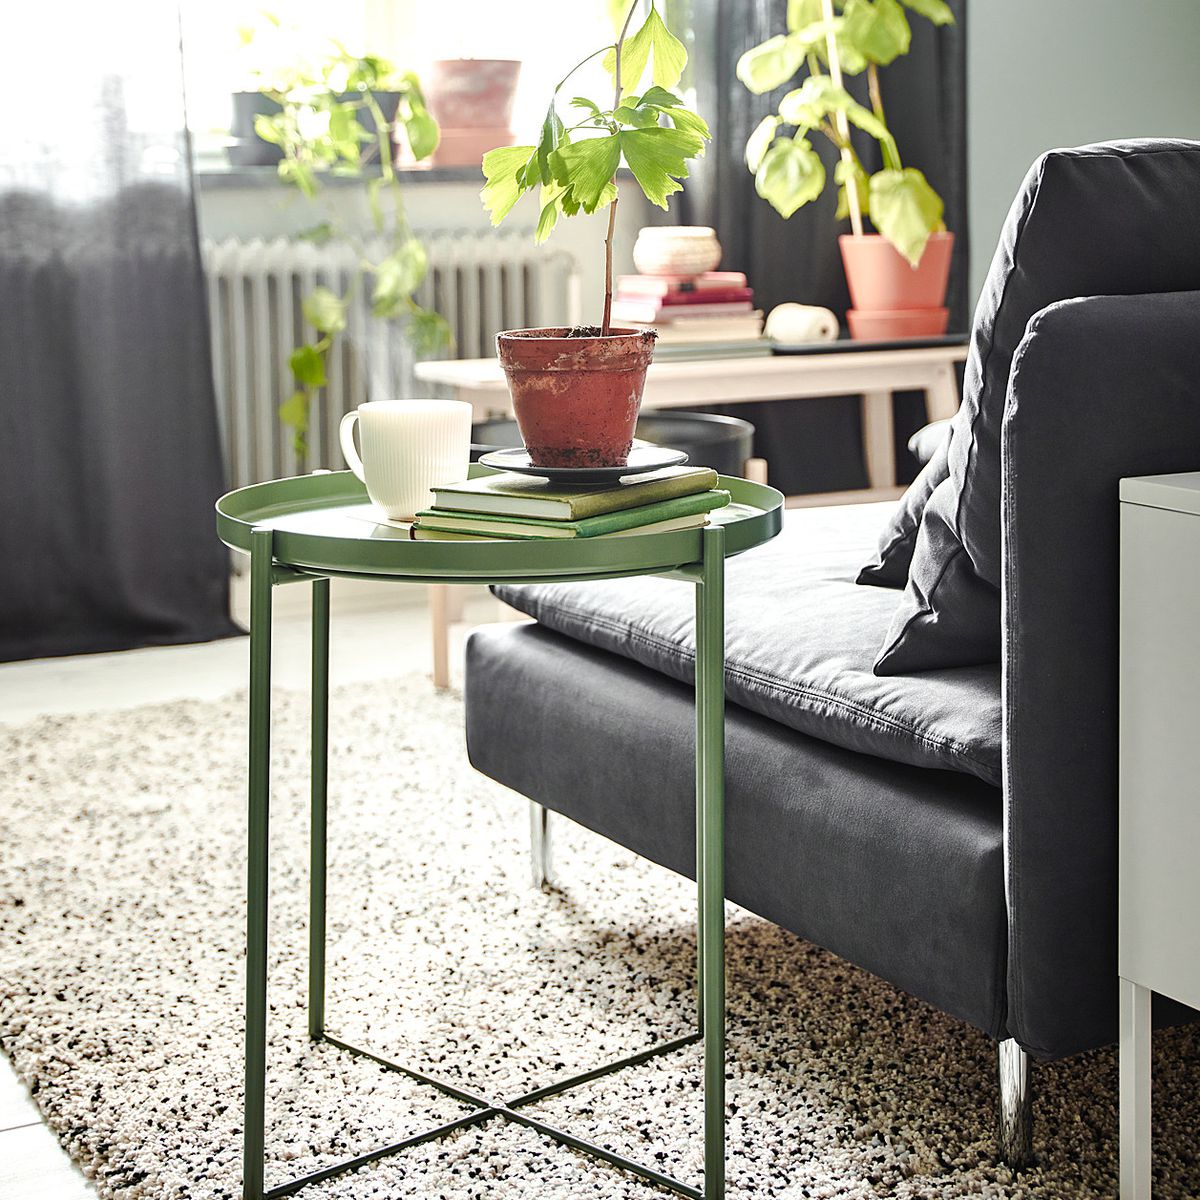 A green side table has books and a coffee mug on it and sits next to a couch. 